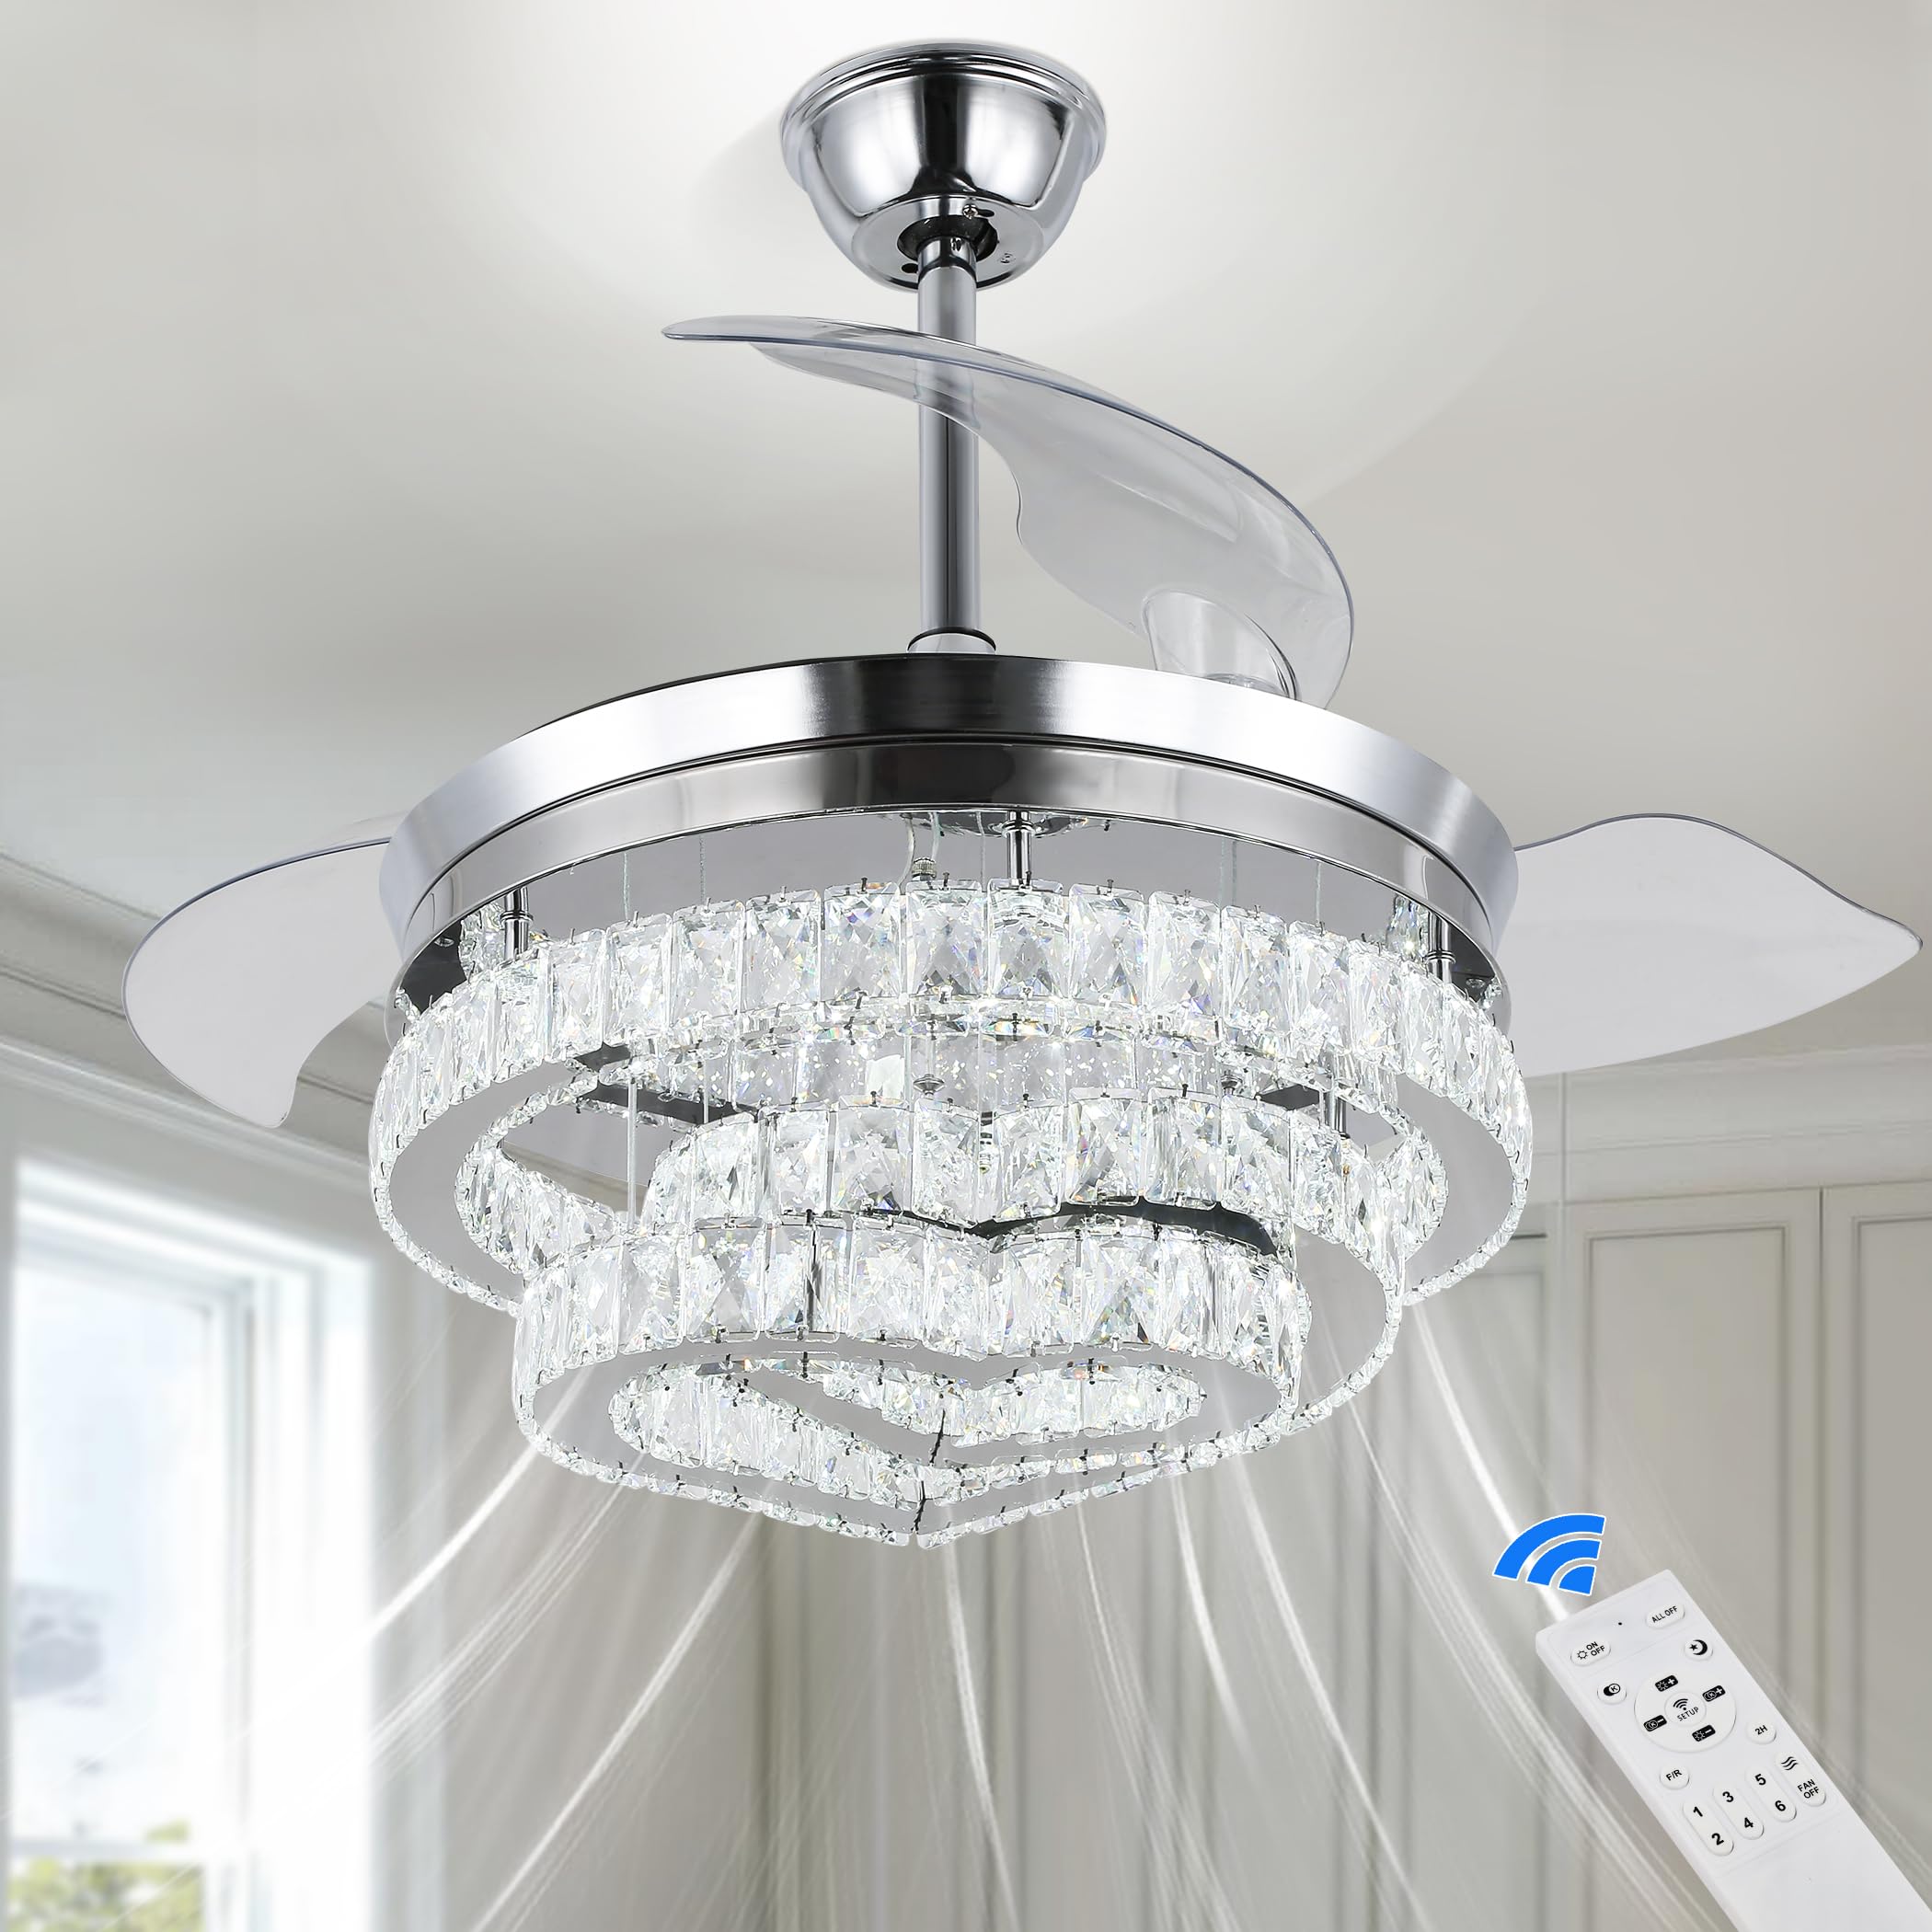 42'' Dimmable Crystal Ceiling Fans Modern LED Ceiling Fandelier Chandeliers with Light Remote Control Retractable Crystal Fandeliers for Bedrooms, APP & Memory Function, 6 Speeds